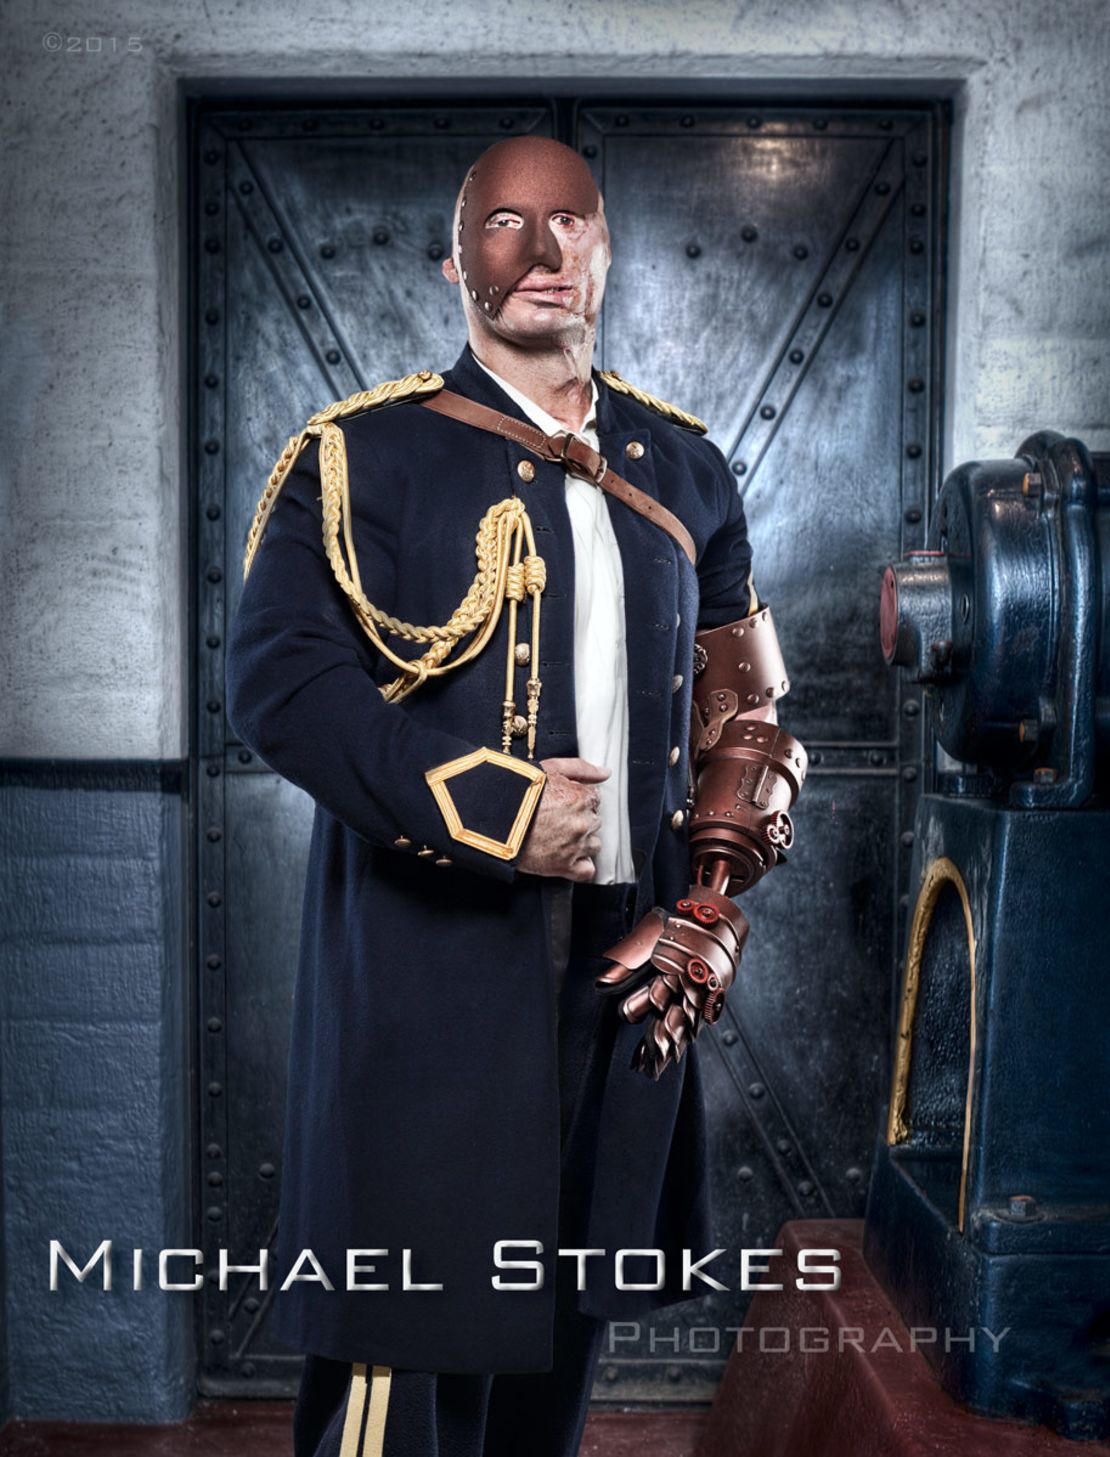 Bobby Henline, as photographed by Michael Stokes